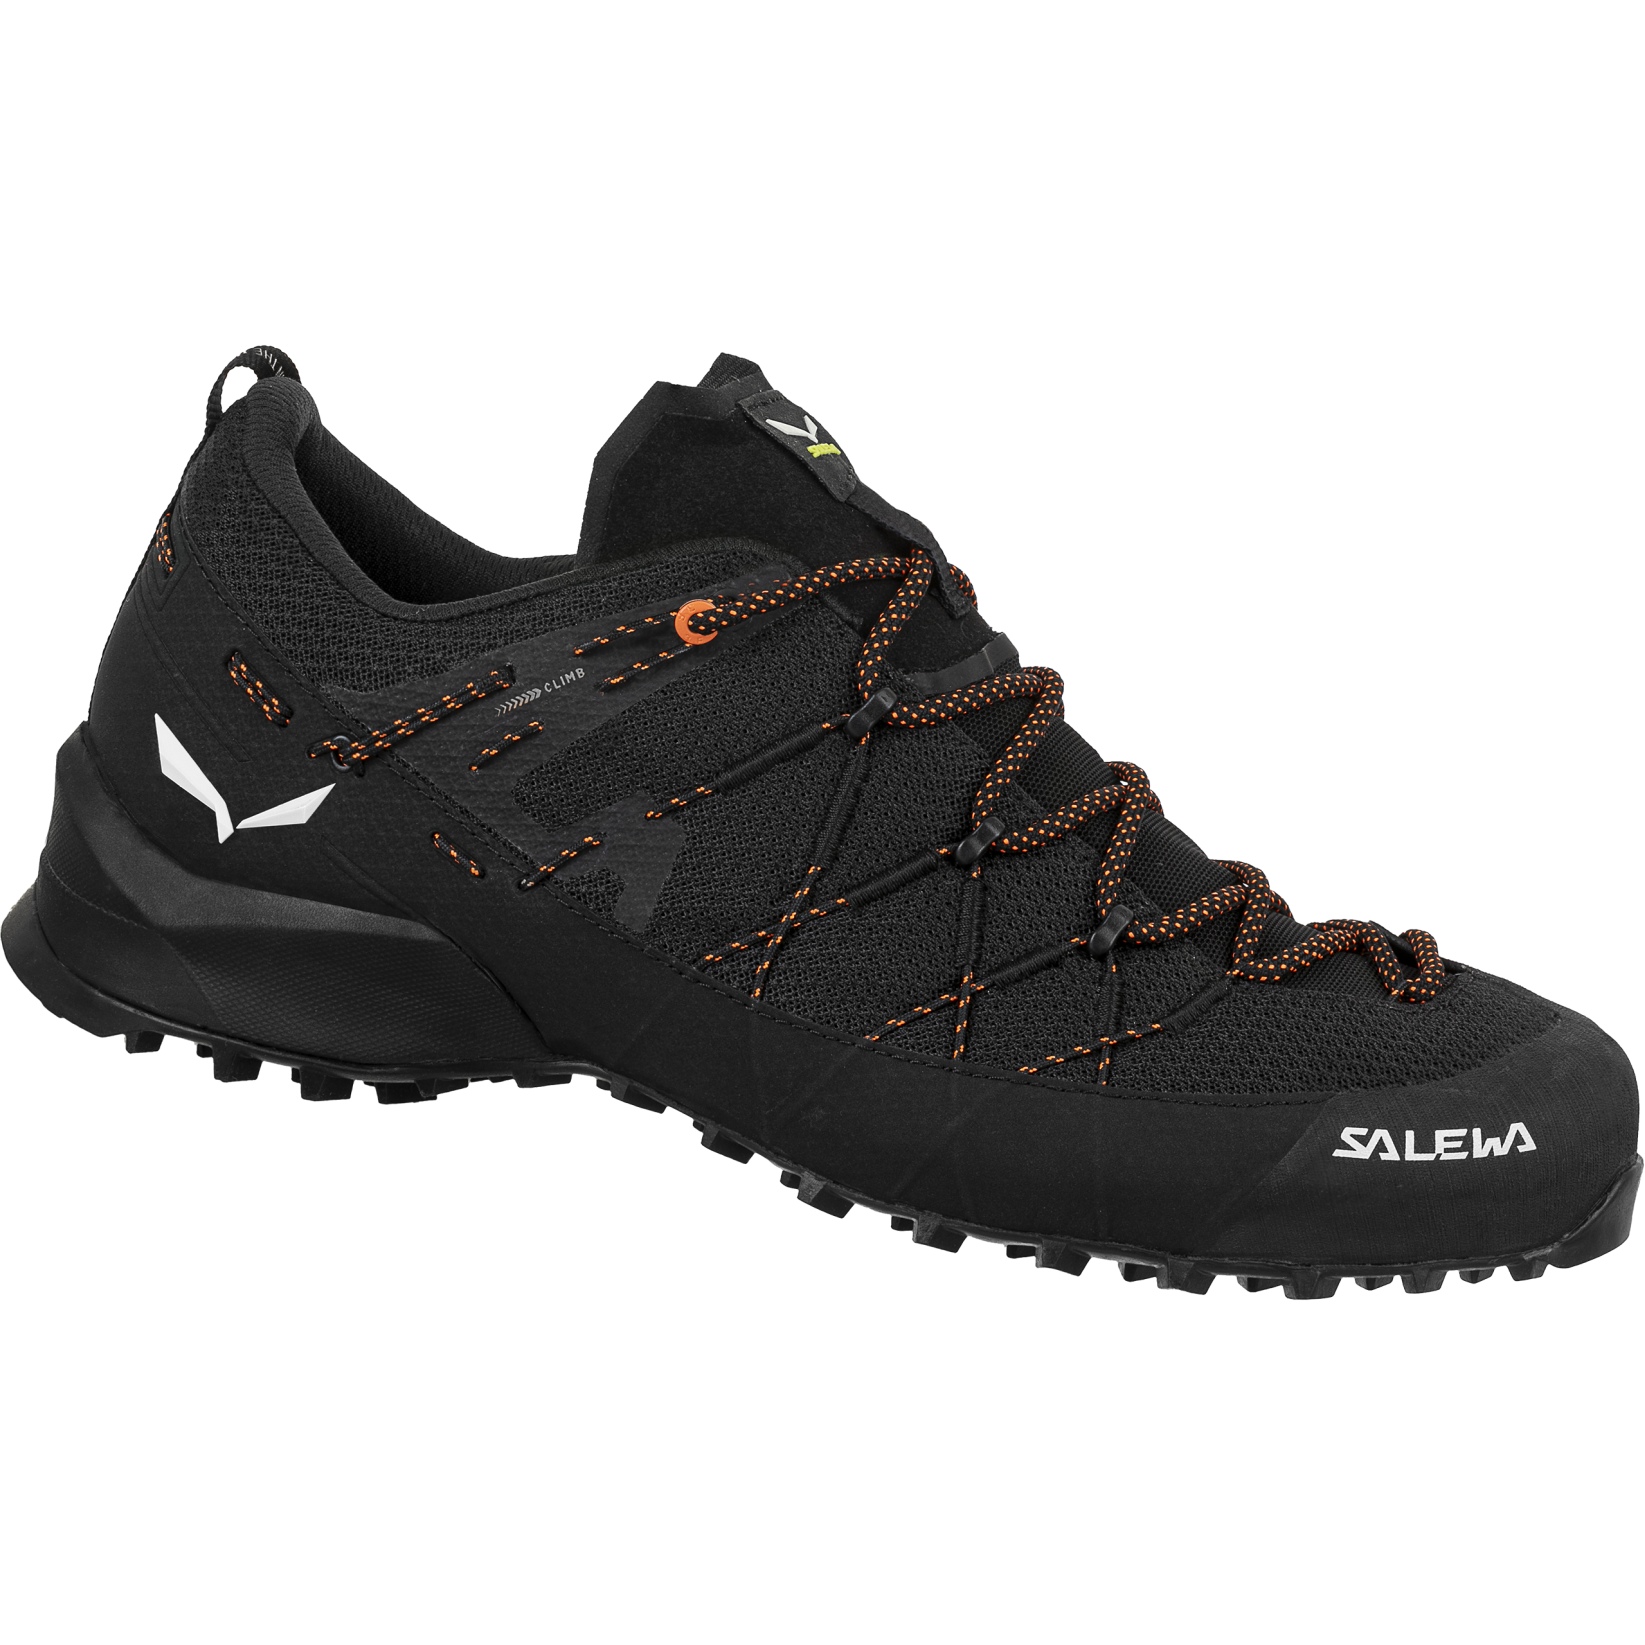 Picture of Salewa Wildfire 2 Approach Shoes Men - black/black 971